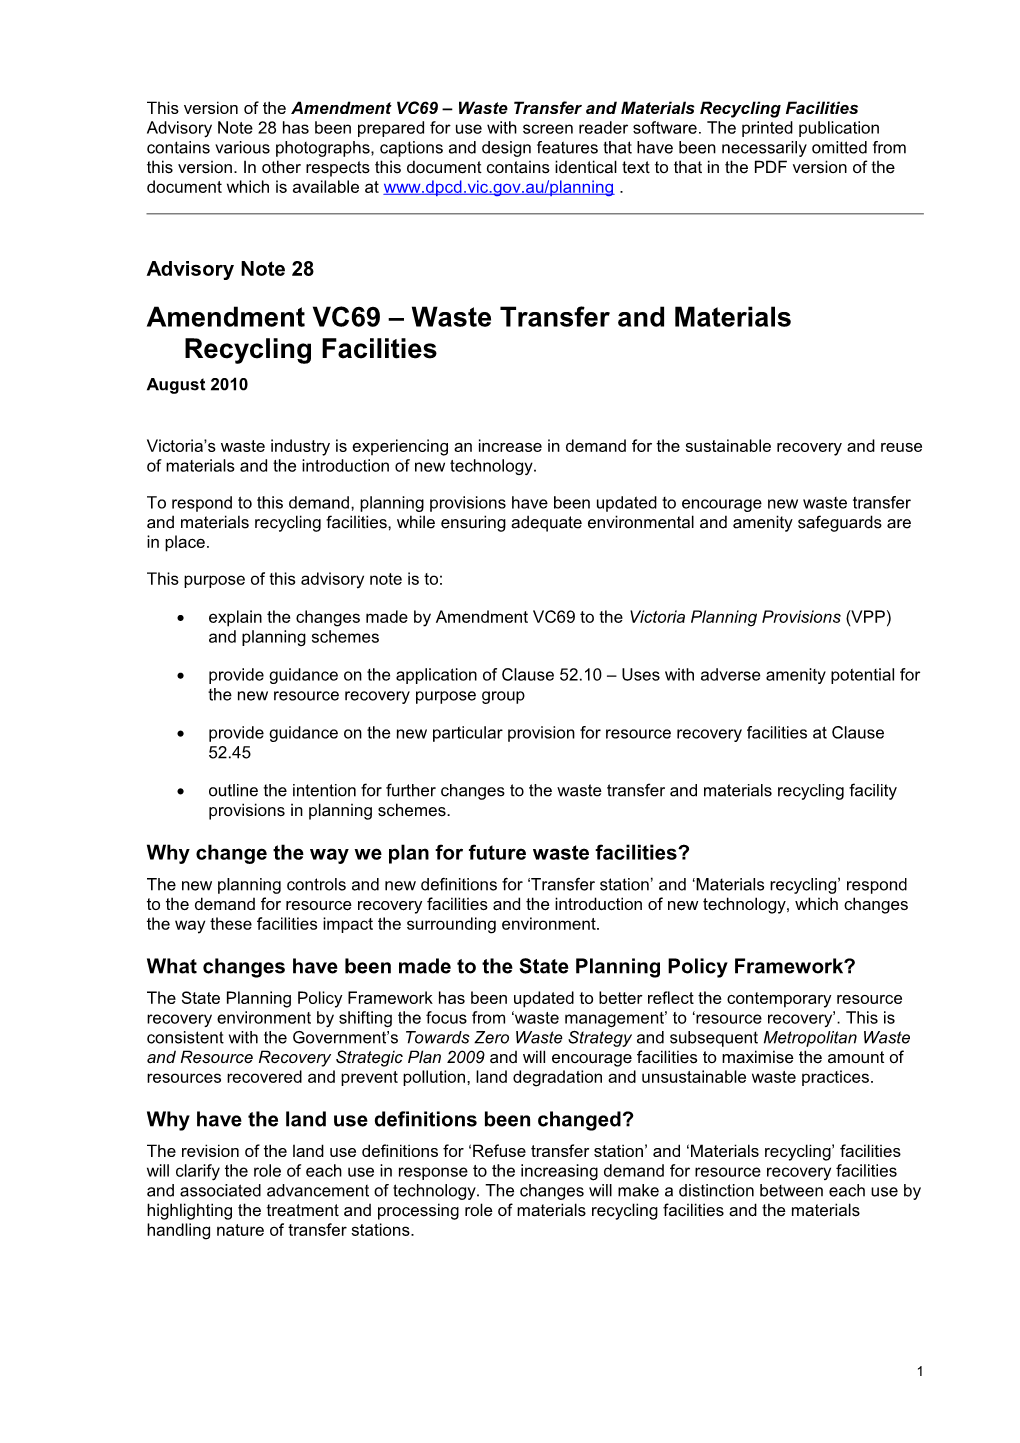 Amendment VC69 Waste Transfer and Materials Recycling Facilities Advisory Note 28